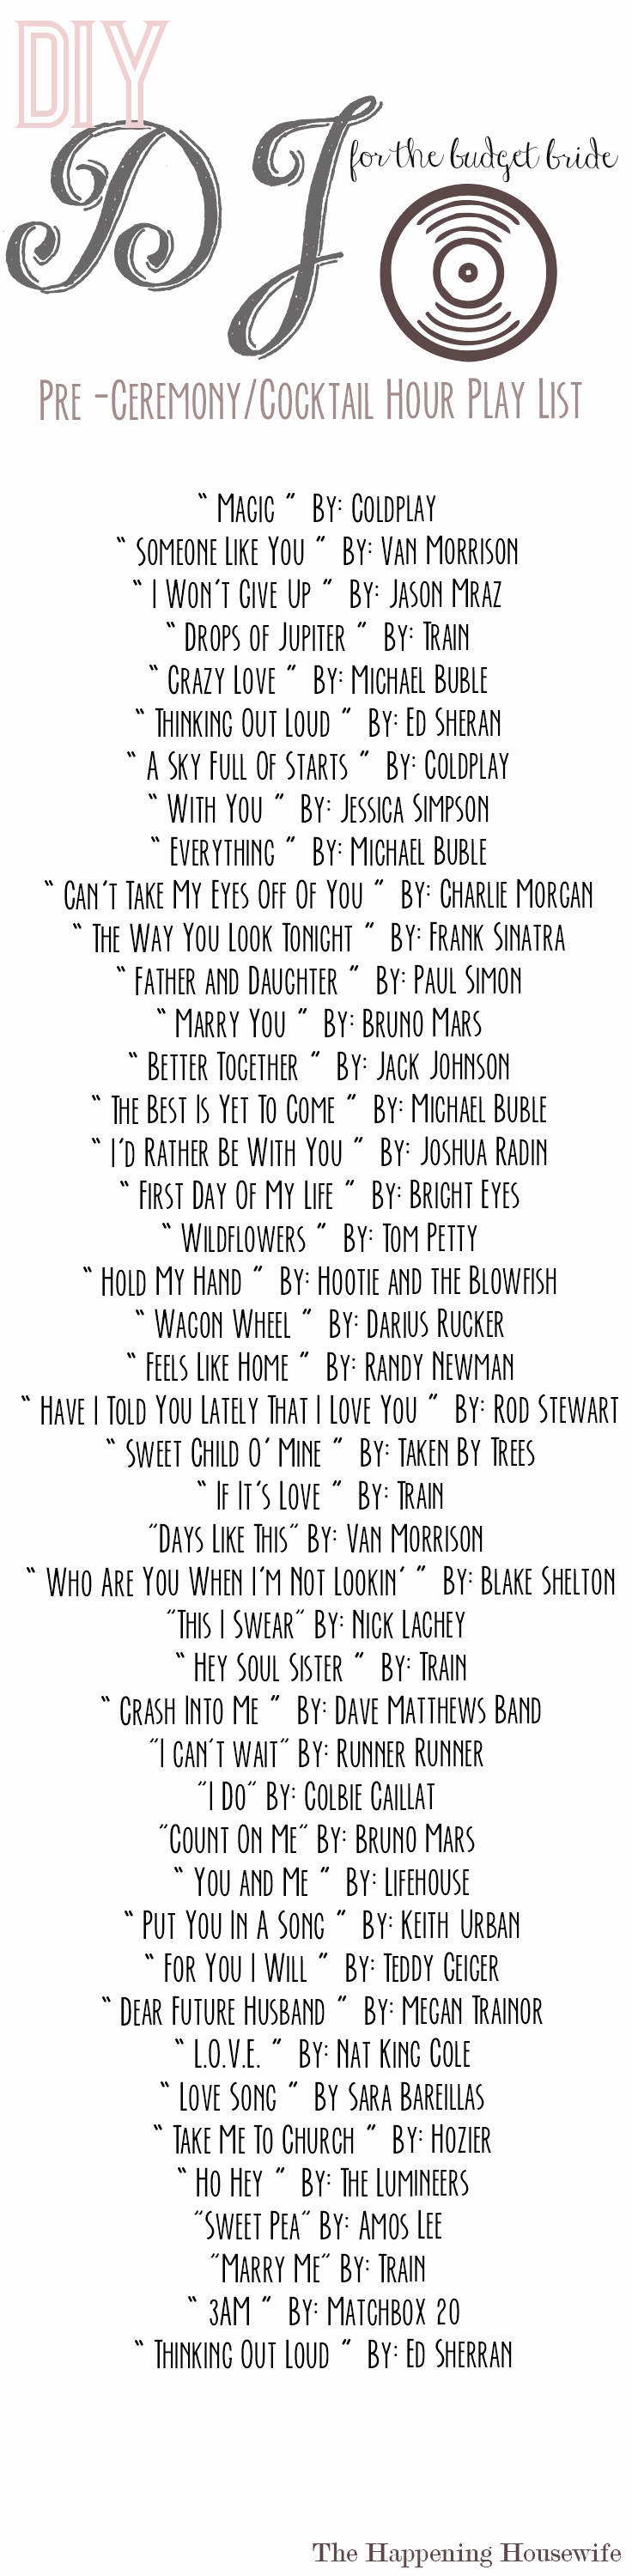 Wedding Ceremony song List Template New Save Money On A Dj by Playing This Simple Playlist Pre